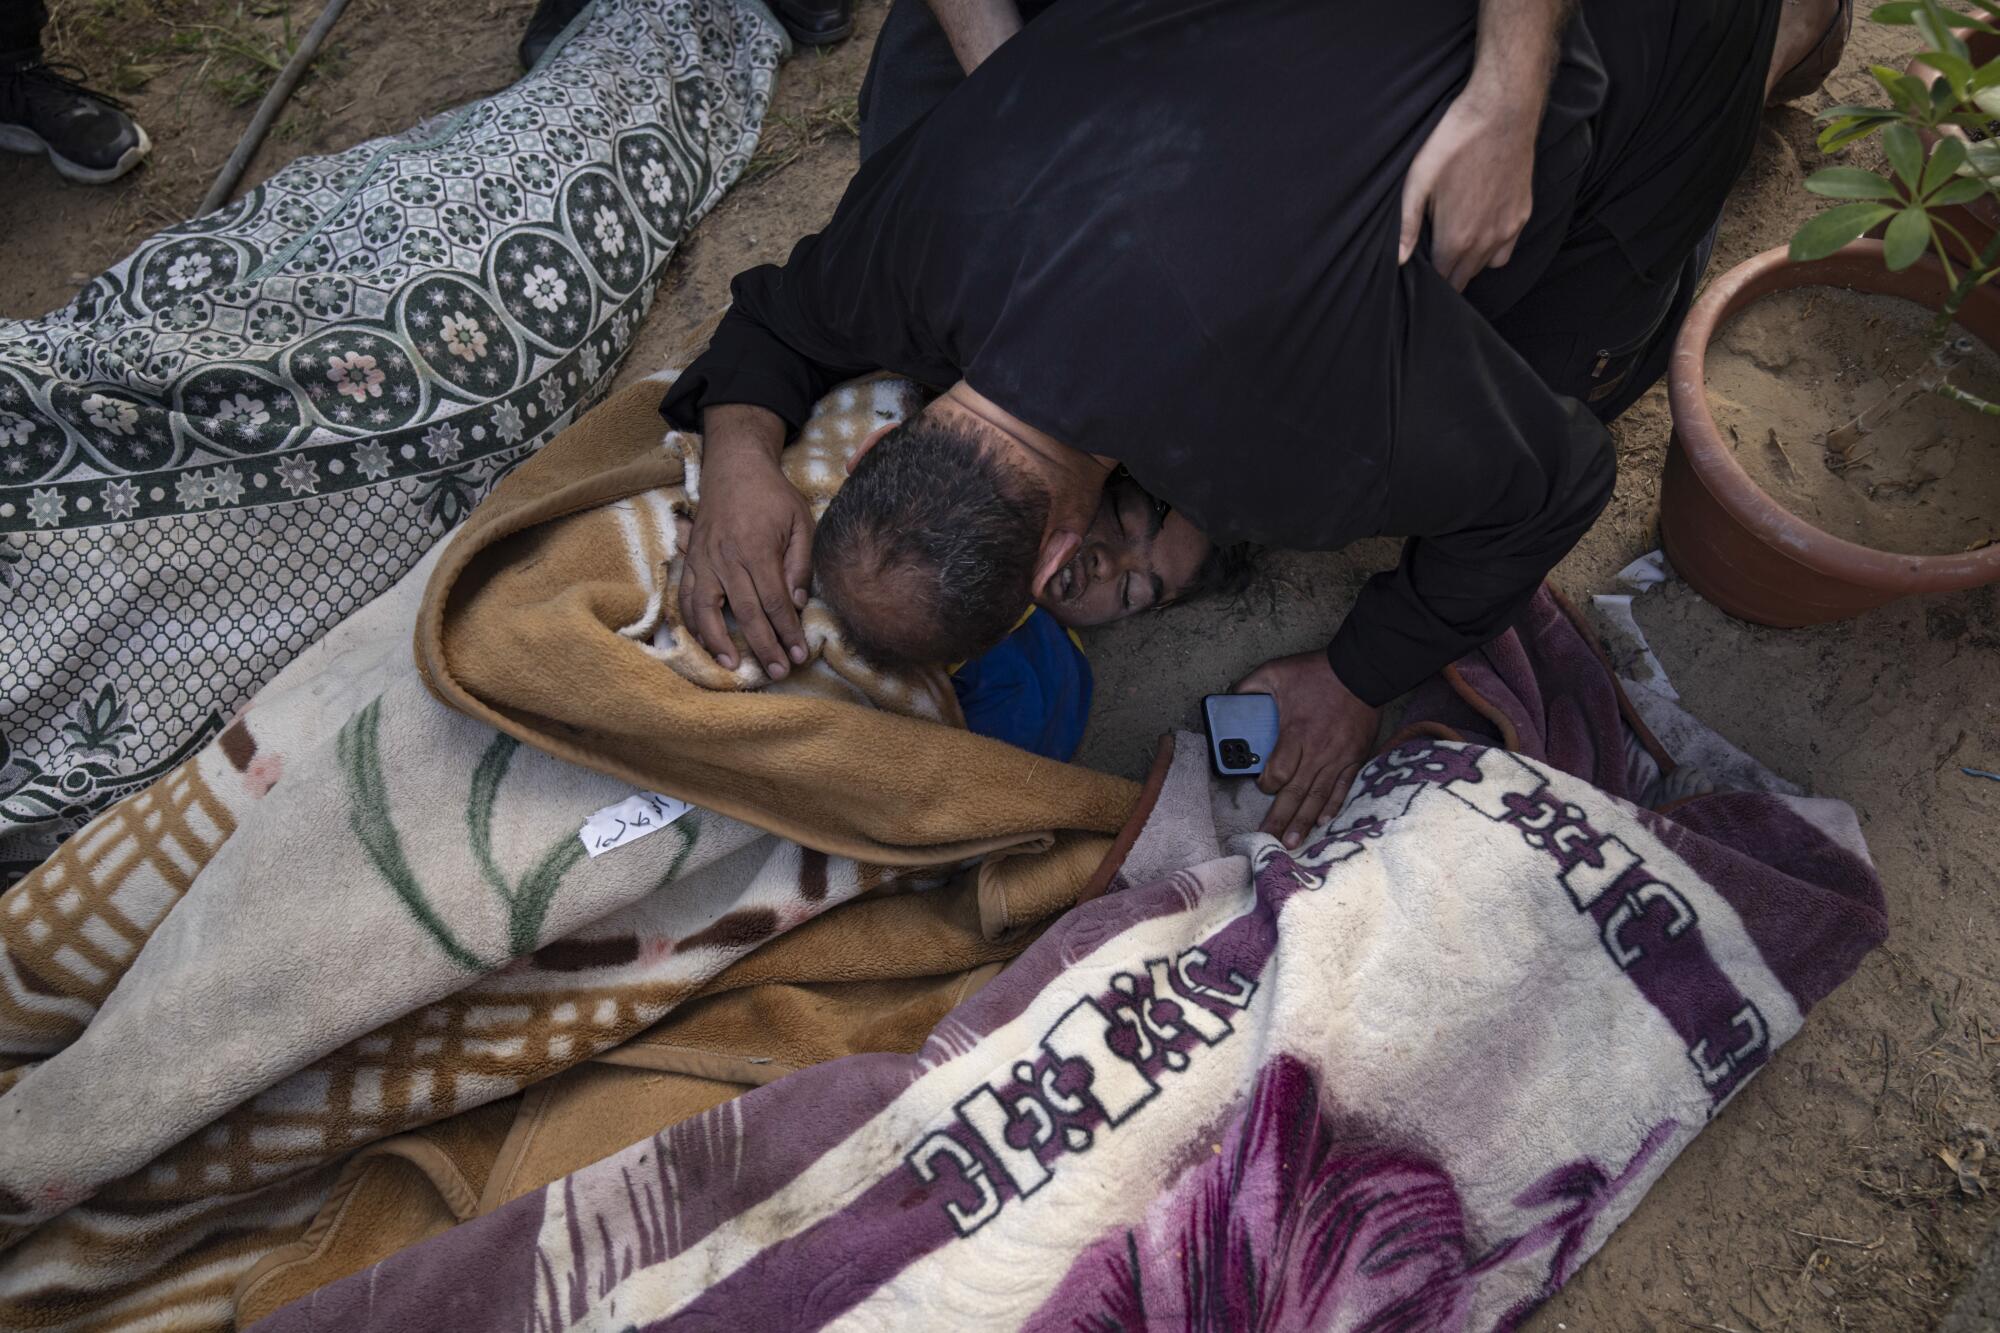 A Palestinian man bows in grief over bodies wrapped in blankets.